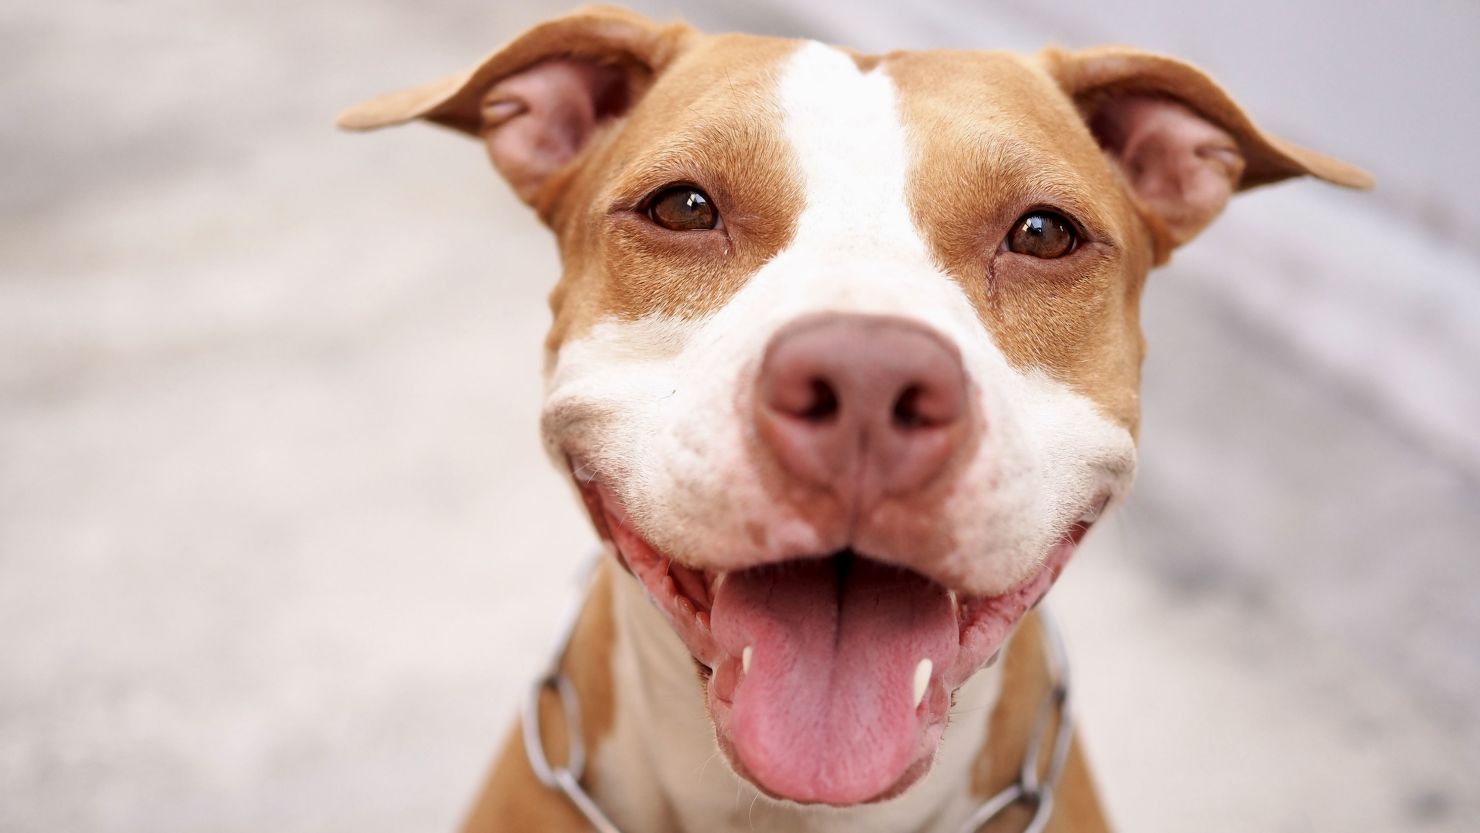 The Denver City Council voted to end the 30-year ban on pit bulls within city limits.